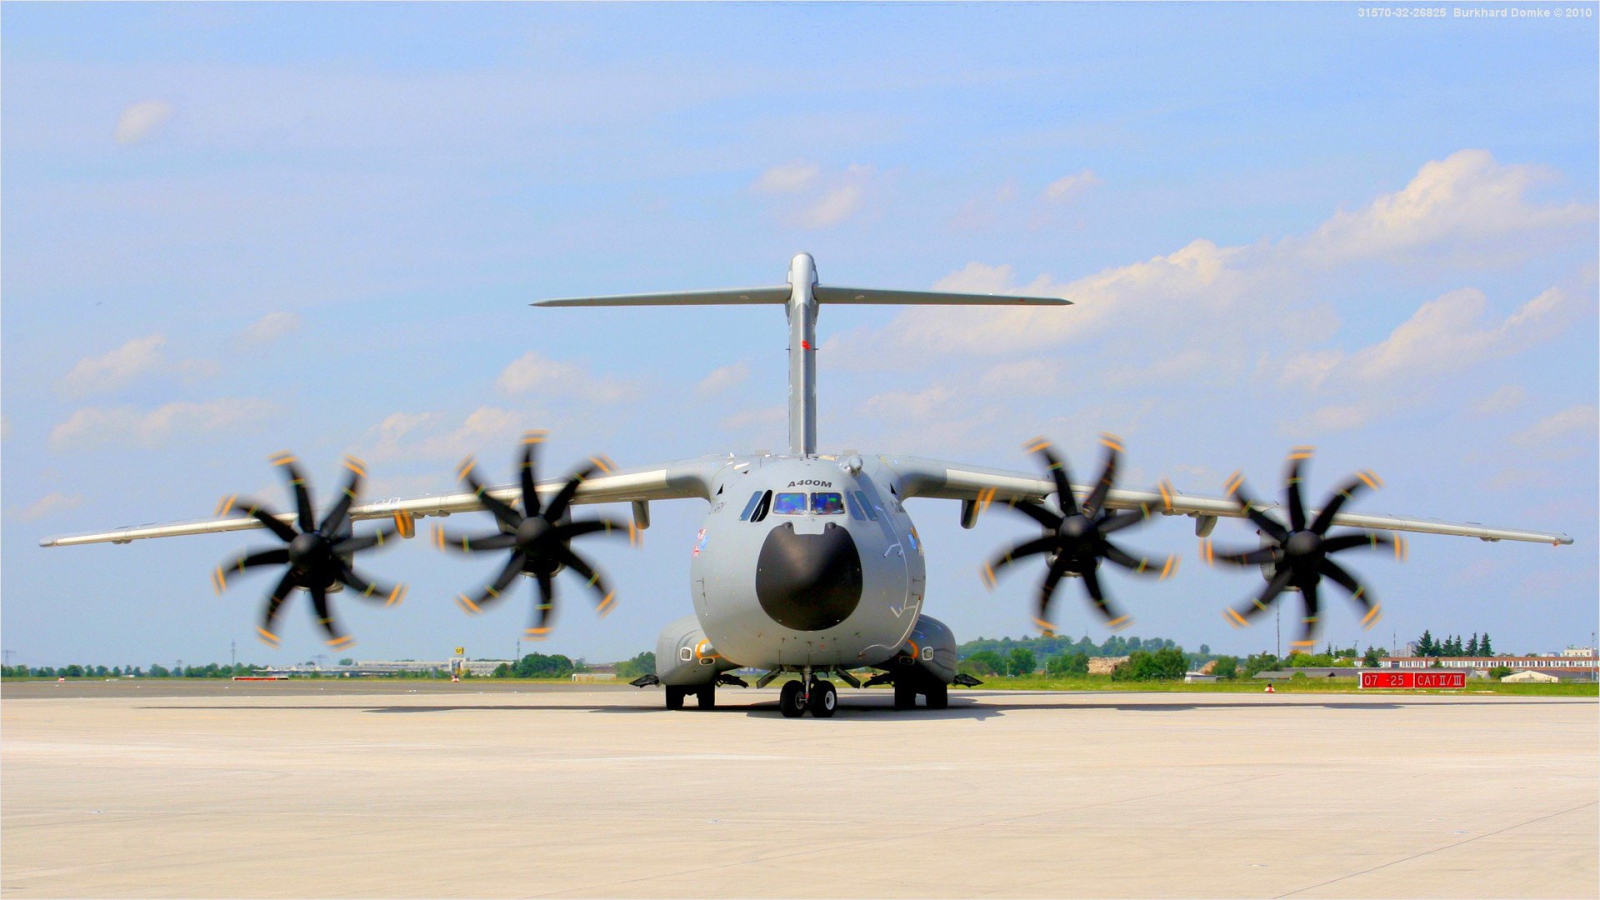 Airbus A400M military aircraft preparing for take-off 